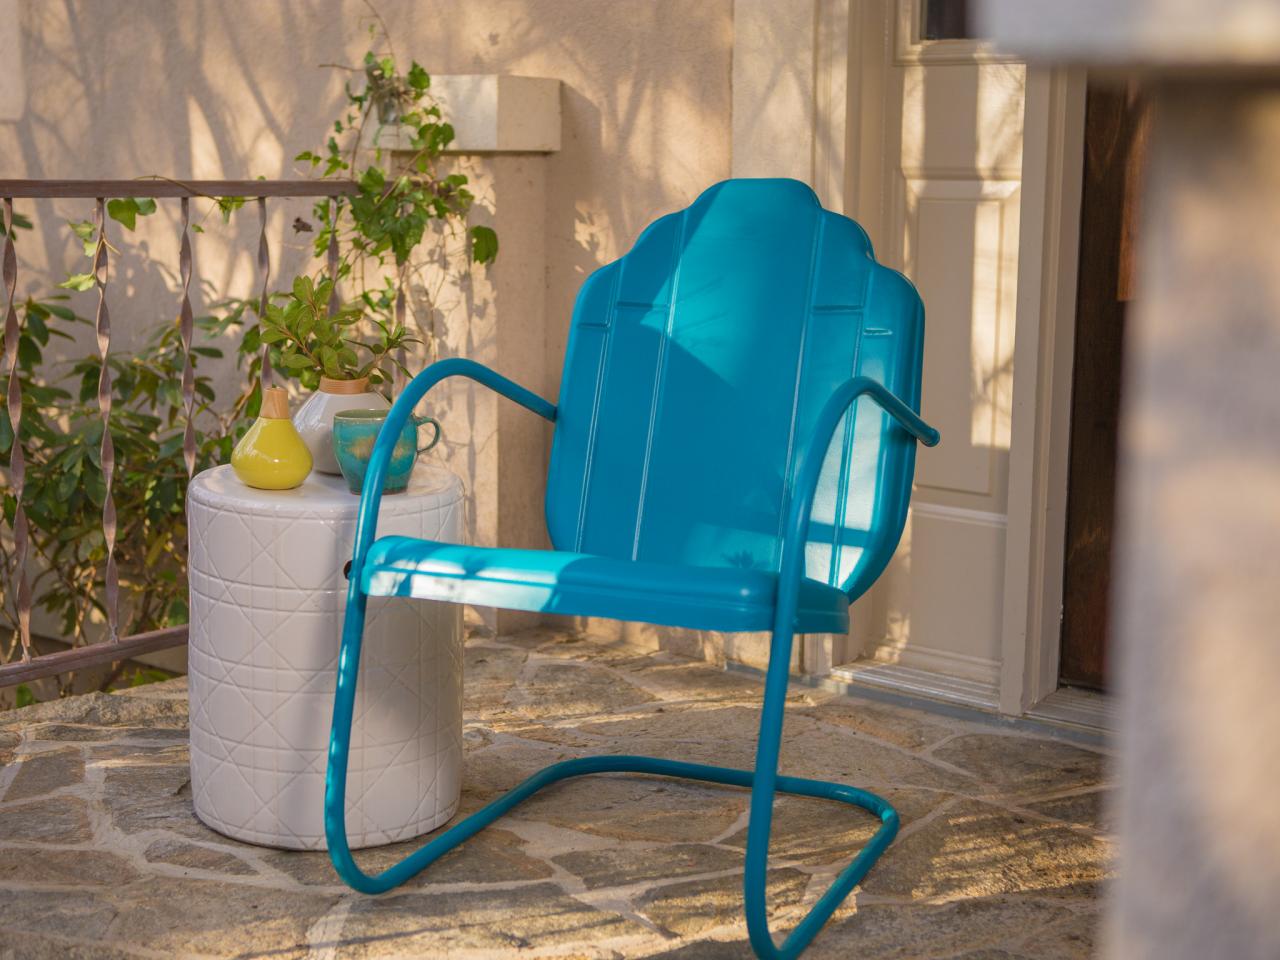 How To Paint An Outdoor Metal Chair, What Paint To Use On Wrought Iron Furniture